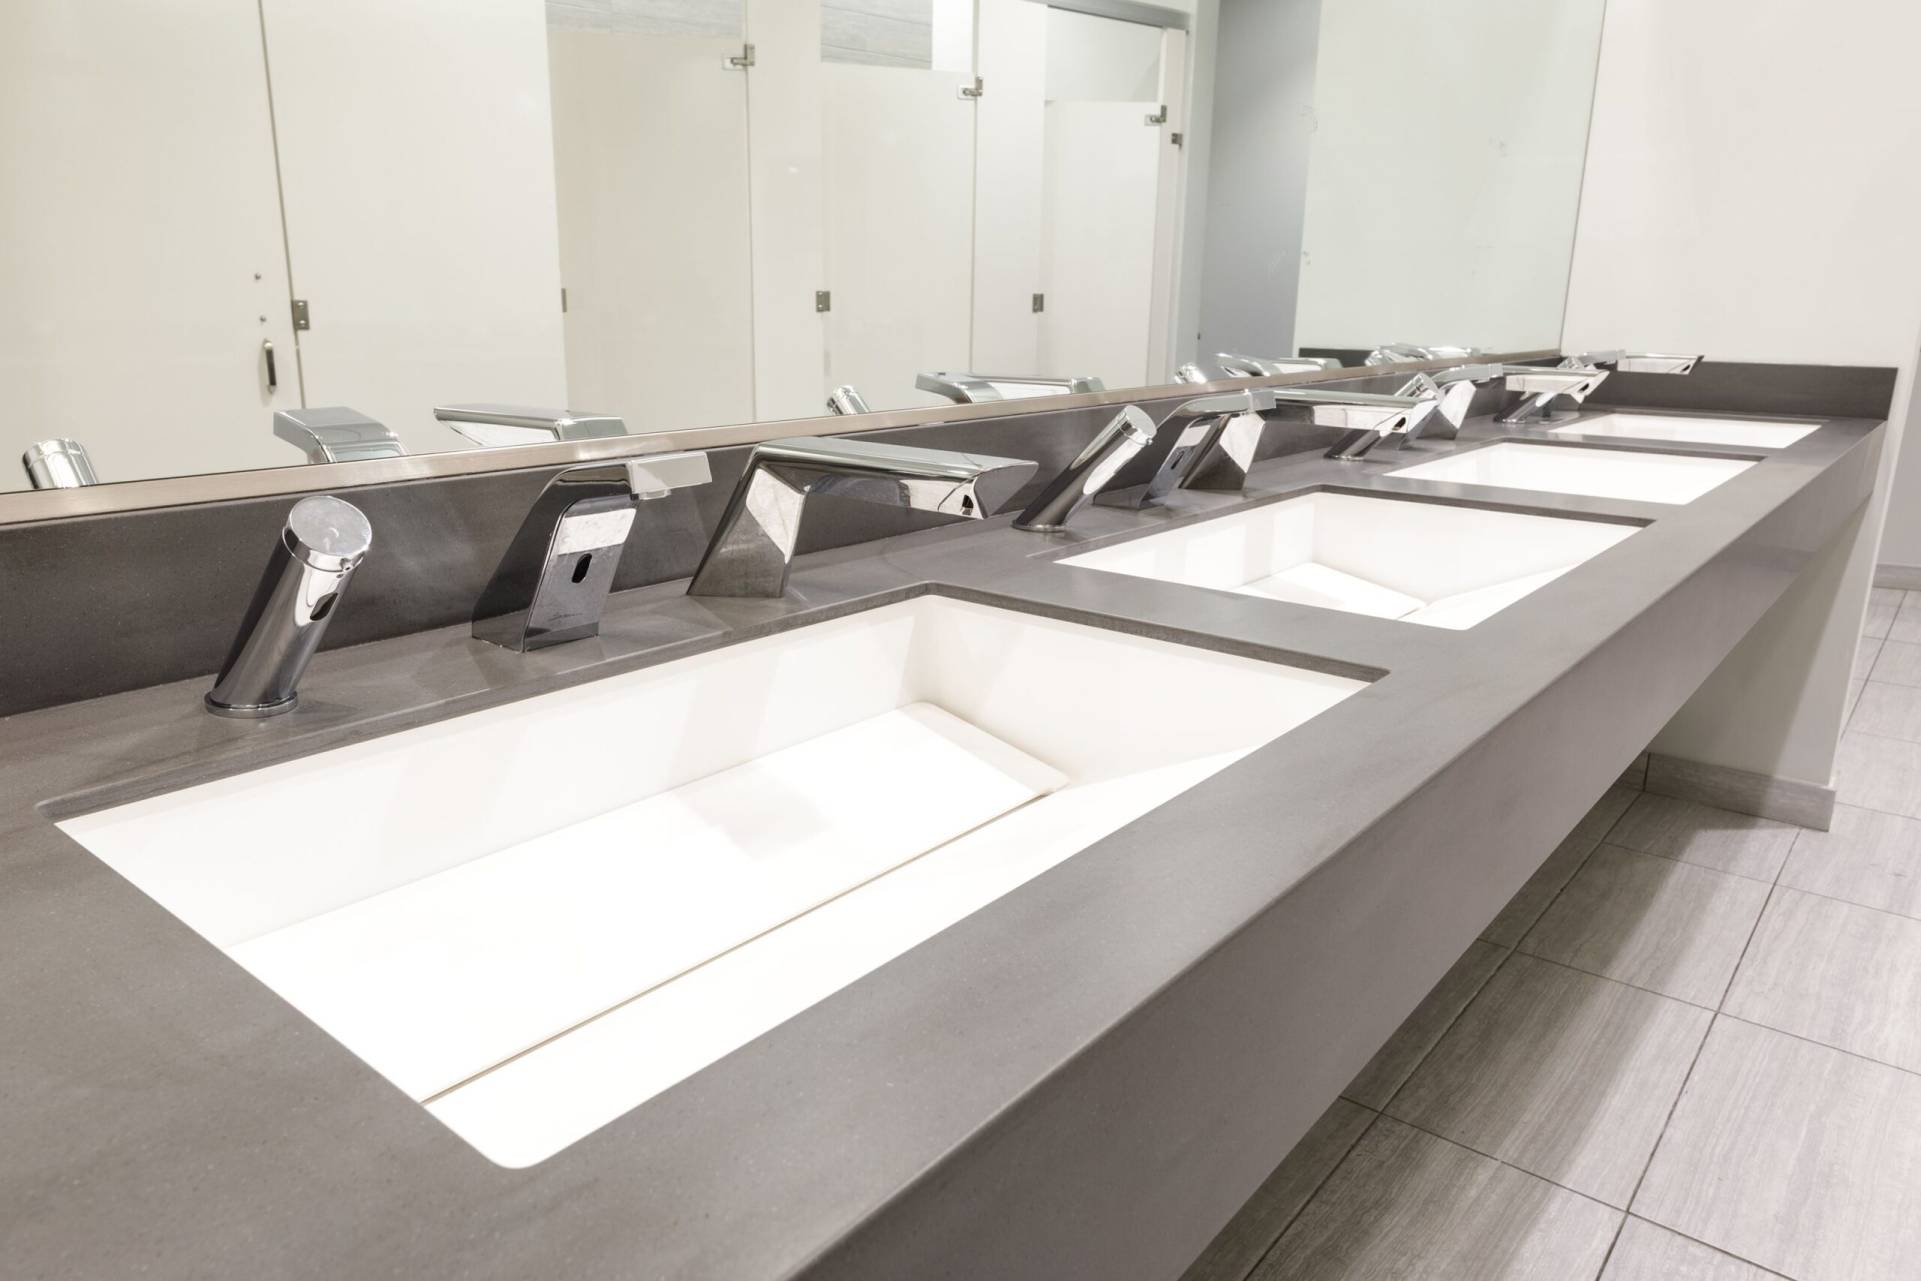 D13 sink systems raise the commercial restroom aesthetic.